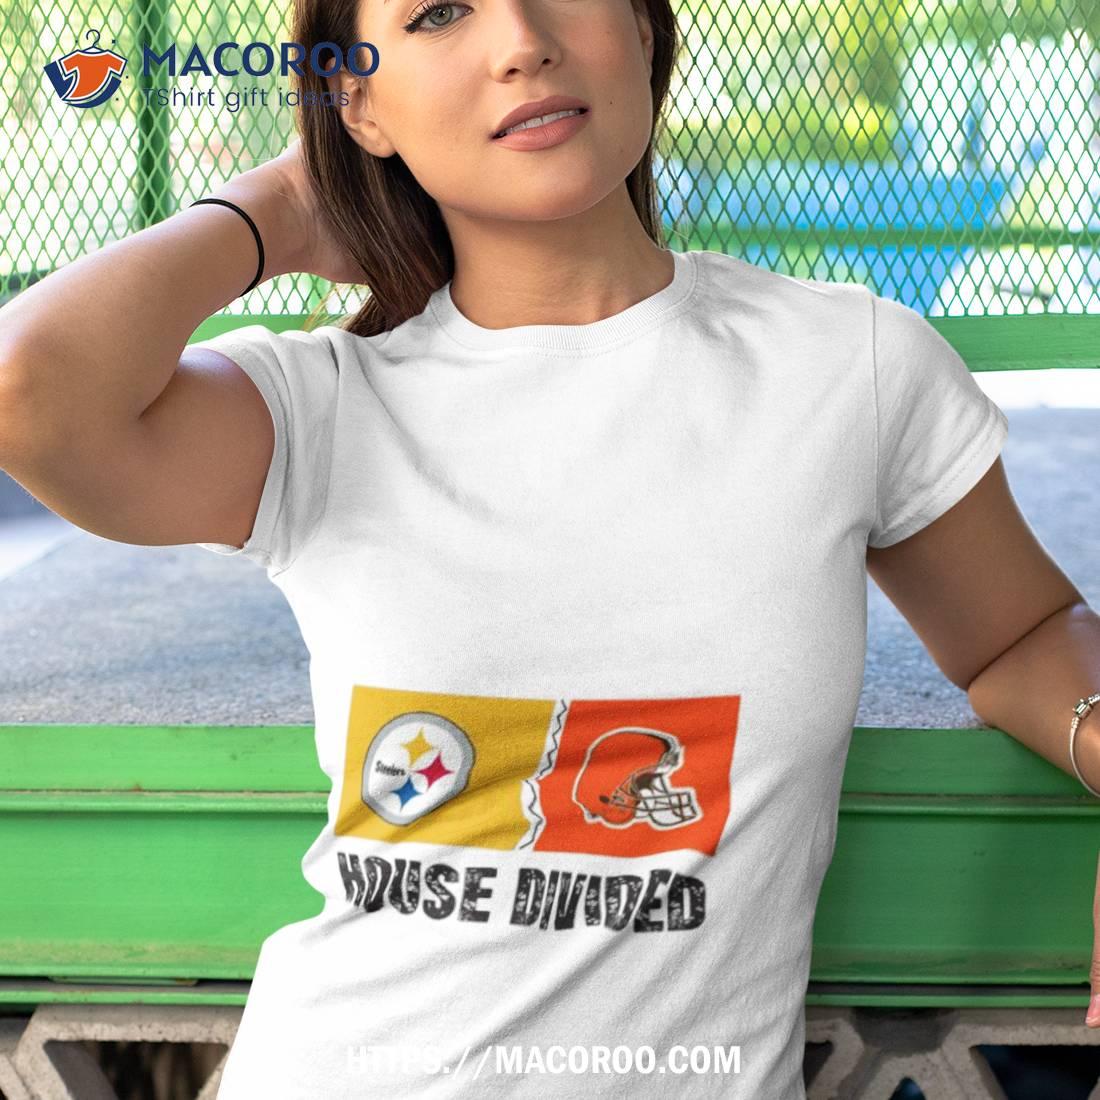 nfl house divided shirts